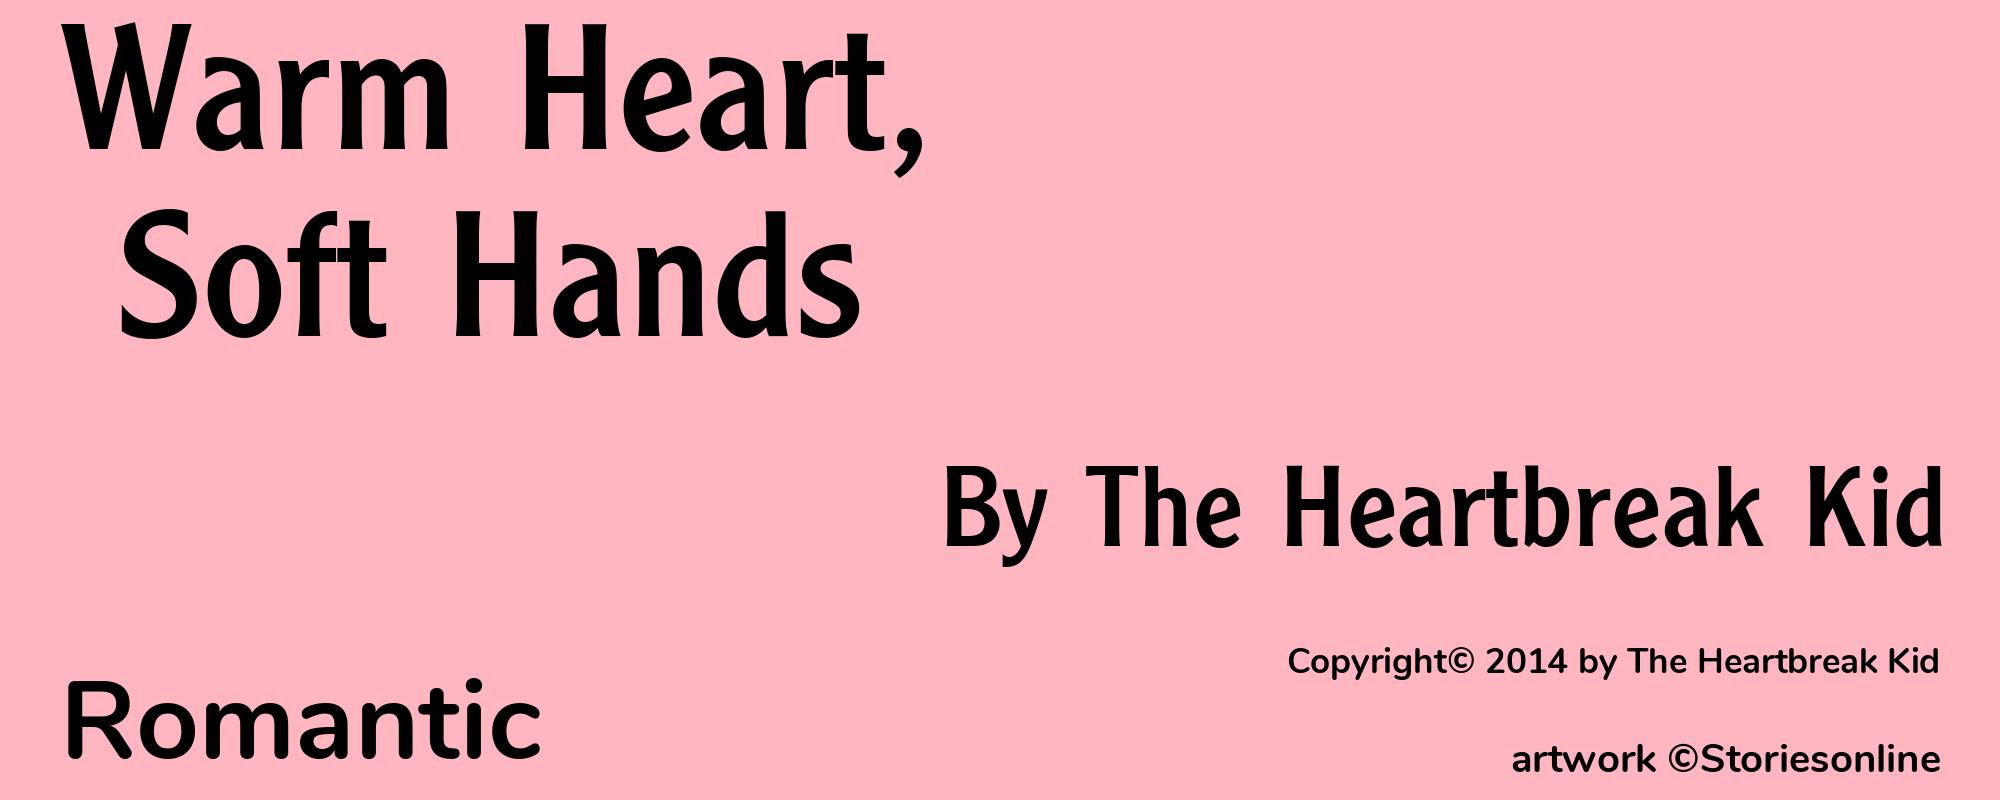 Warm Heart, Soft Hands - Cover